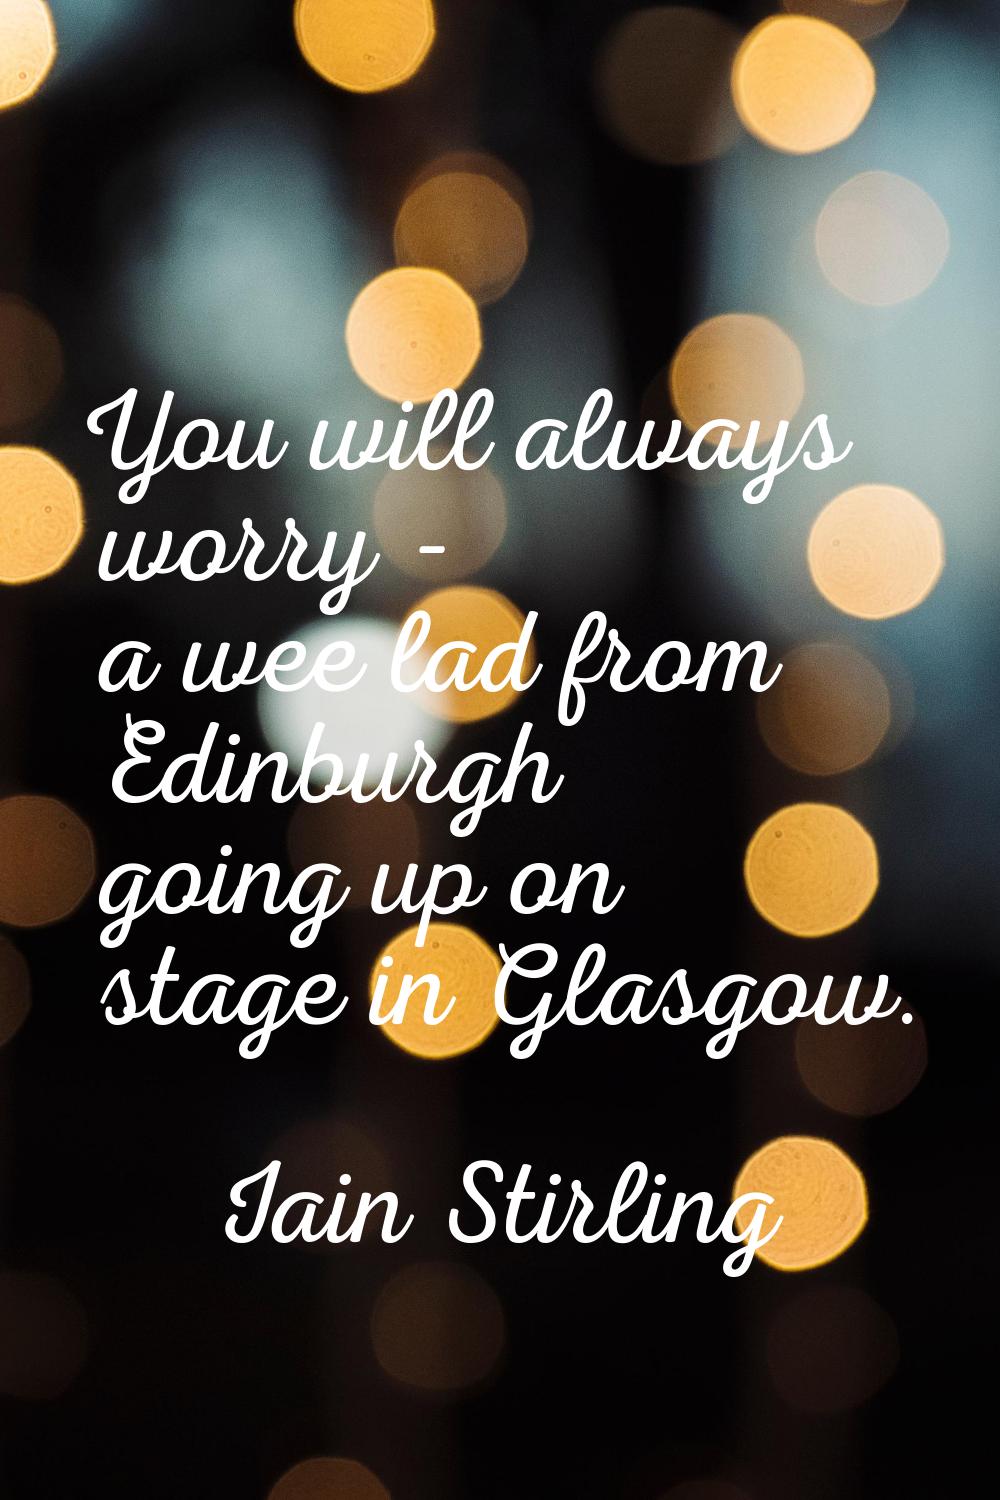 You will always worry - a wee lad from Edinburgh going up on stage in Glasgow.